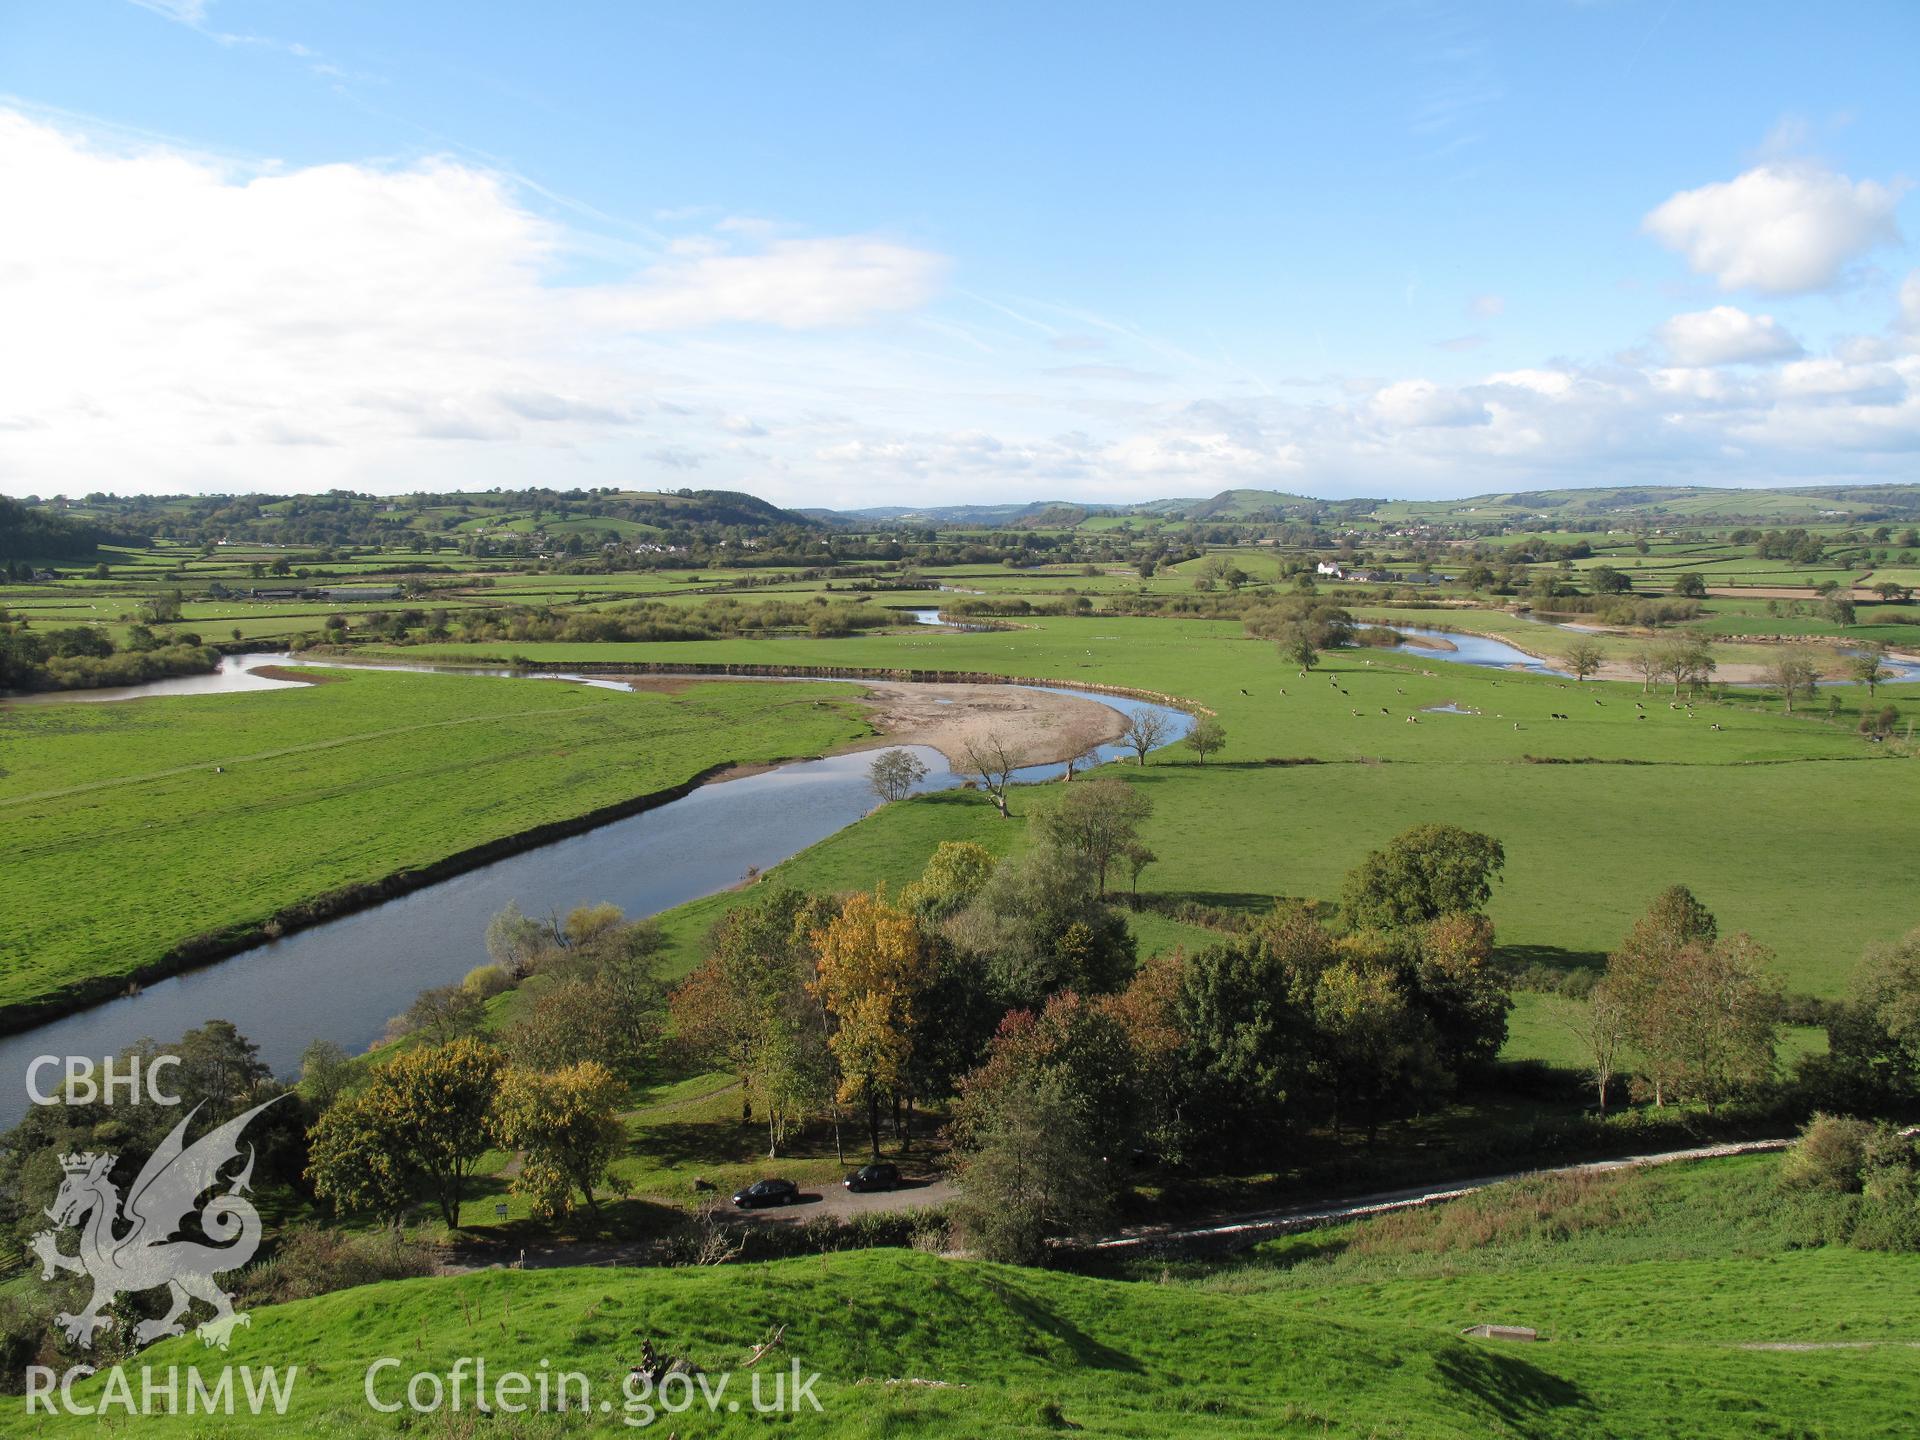 Towy Valley from Dryslwyn Castle, looking west, taken by Brian Malaws on 20 October 2010.